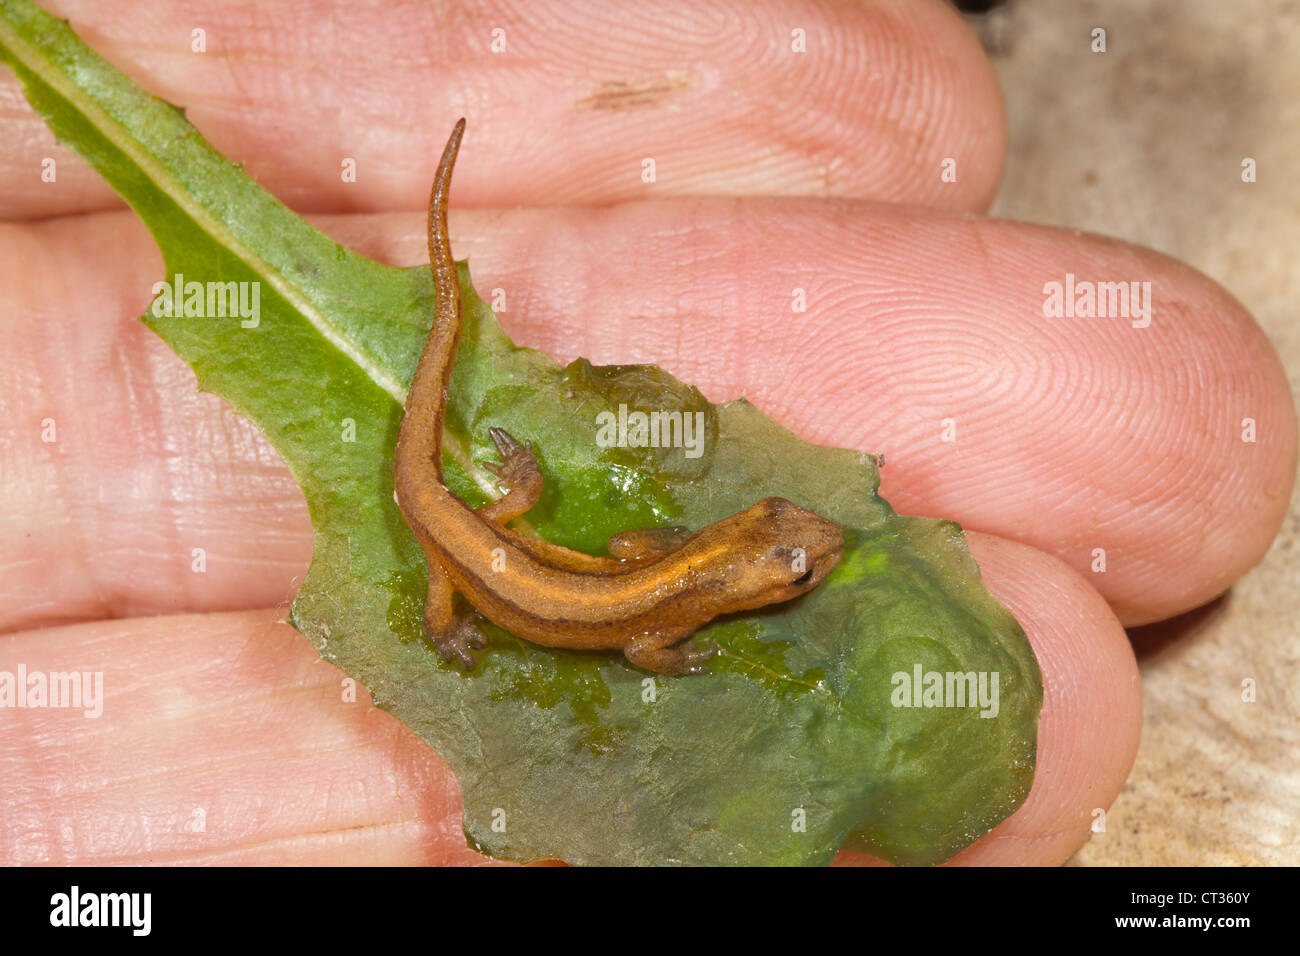 Smooth Newt Lissotriton (Triturus) vulgaris.. Metamorphosed newt tadpole from previous year, held on a dampened leaf. Found under wood plank. Stock Photo